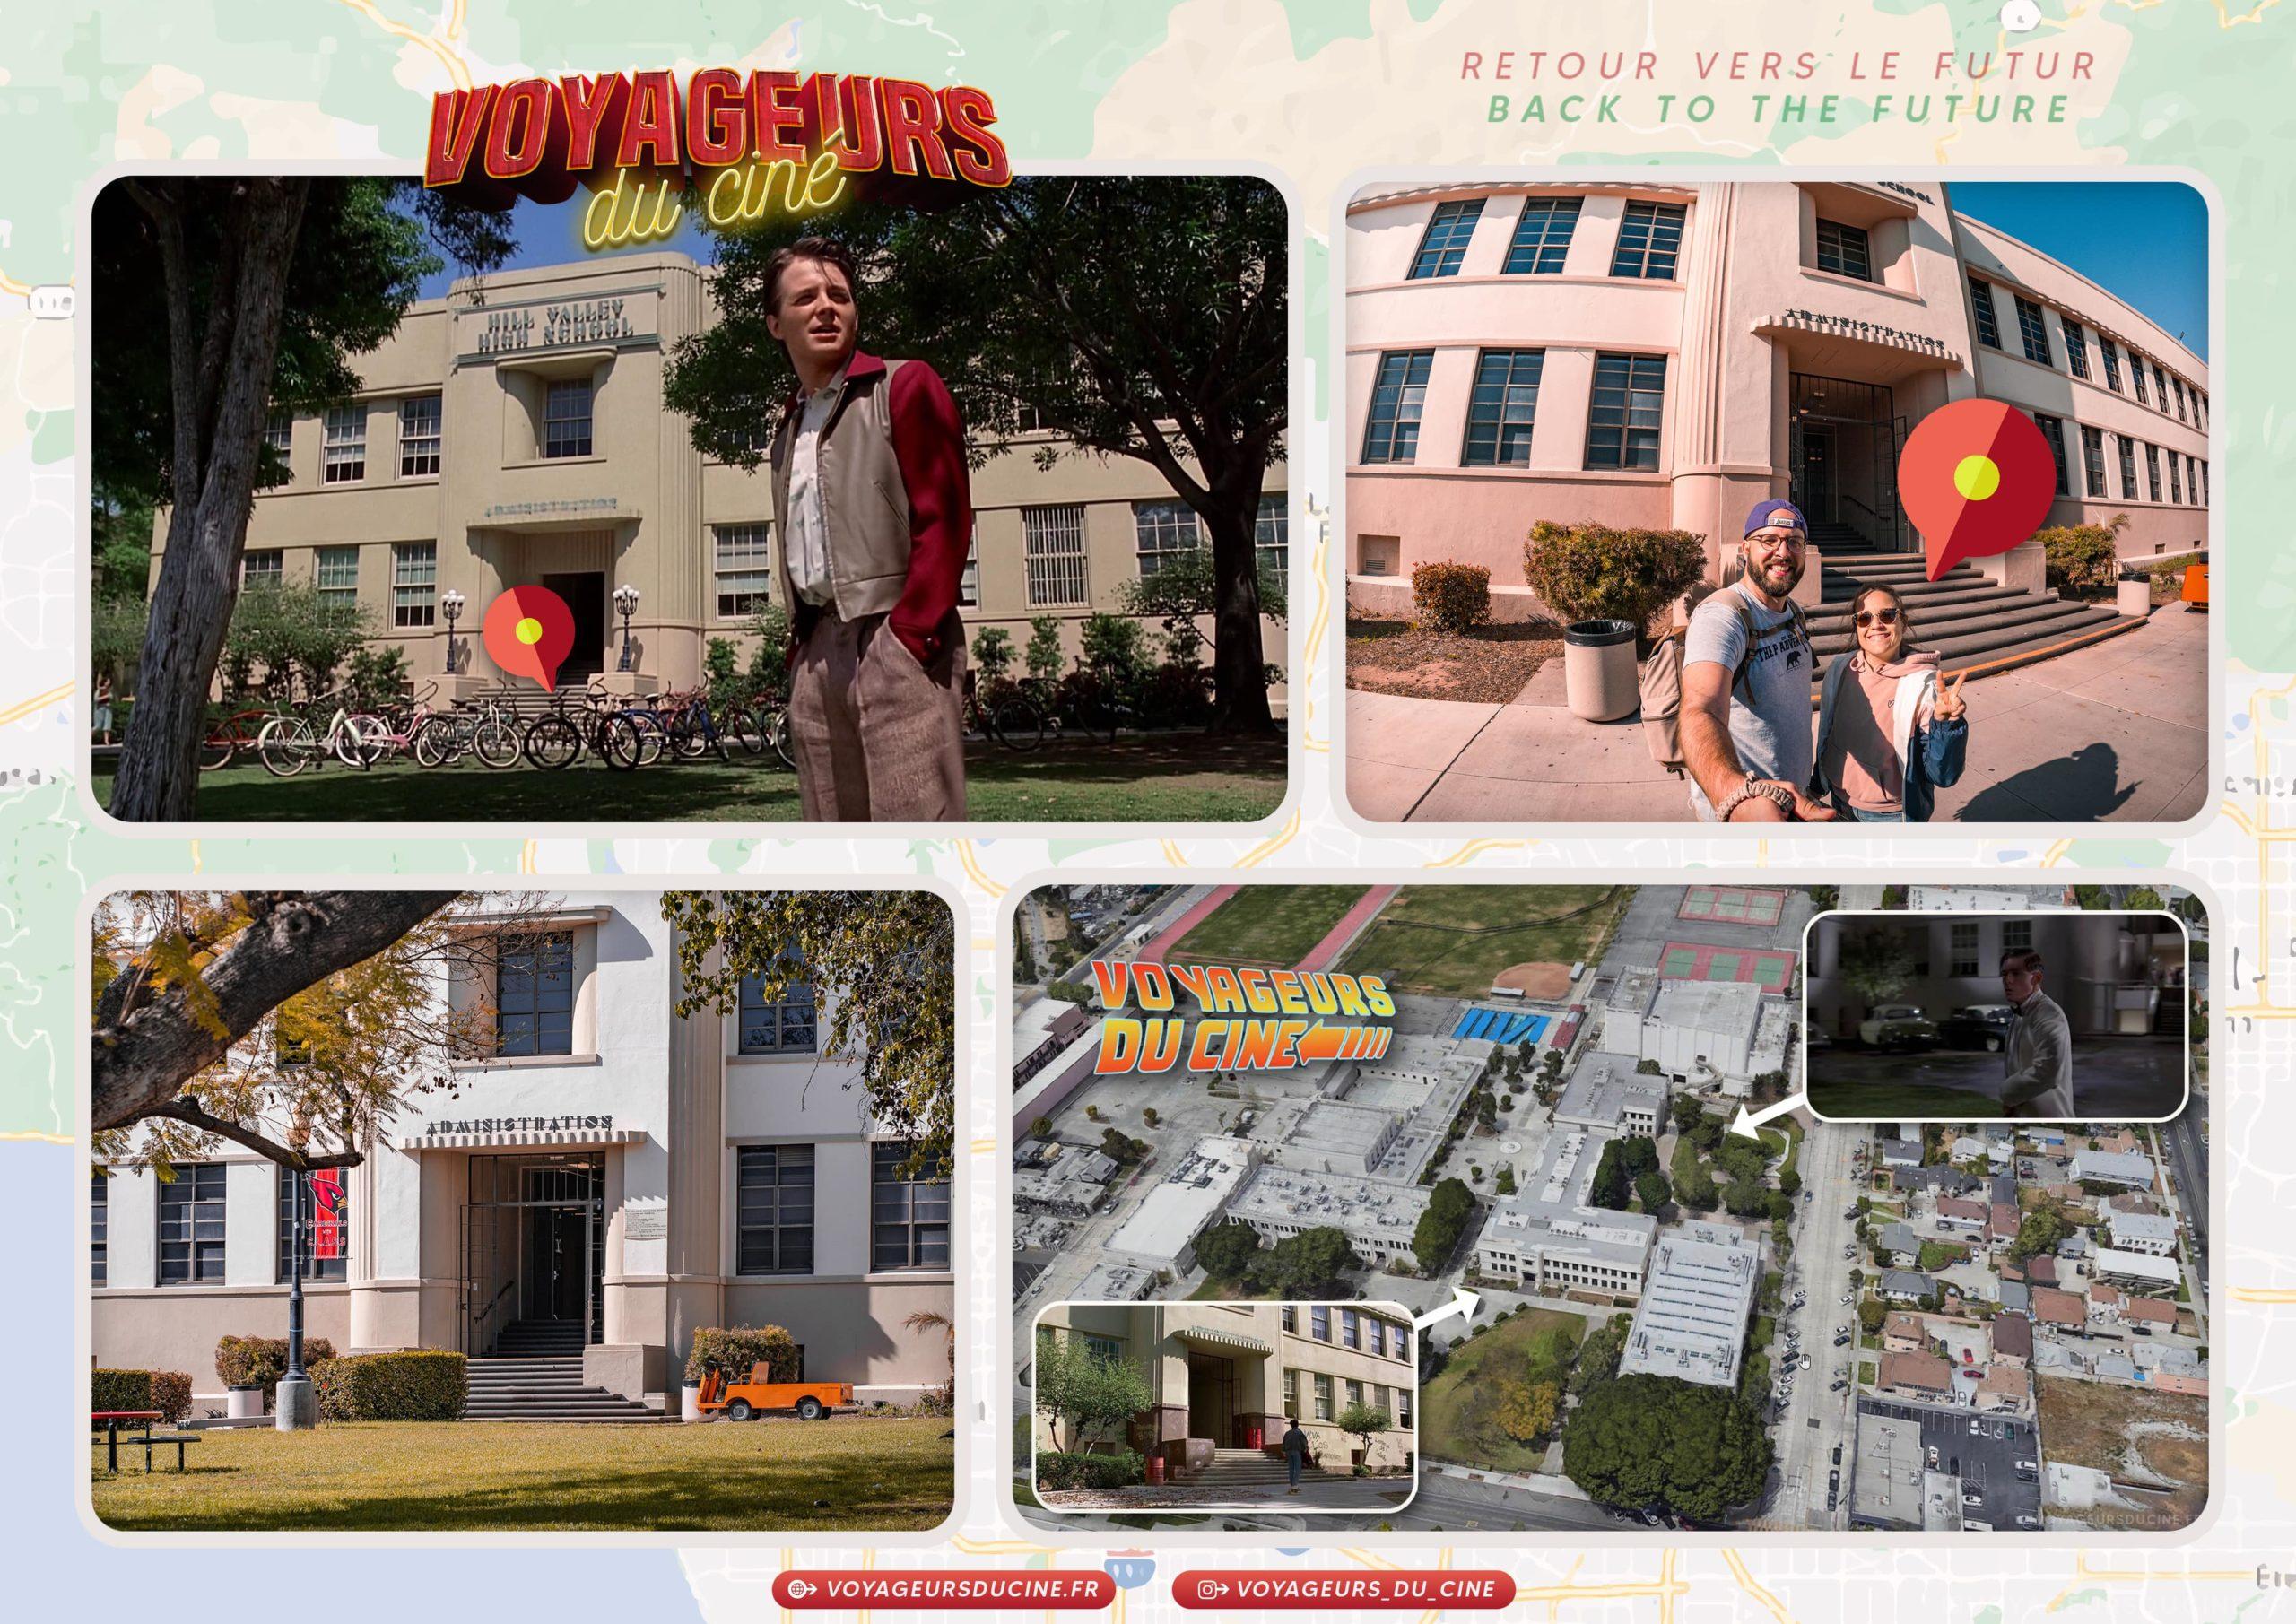 Lycee dans retour vers le futur Hill Valley High School in Back to the future